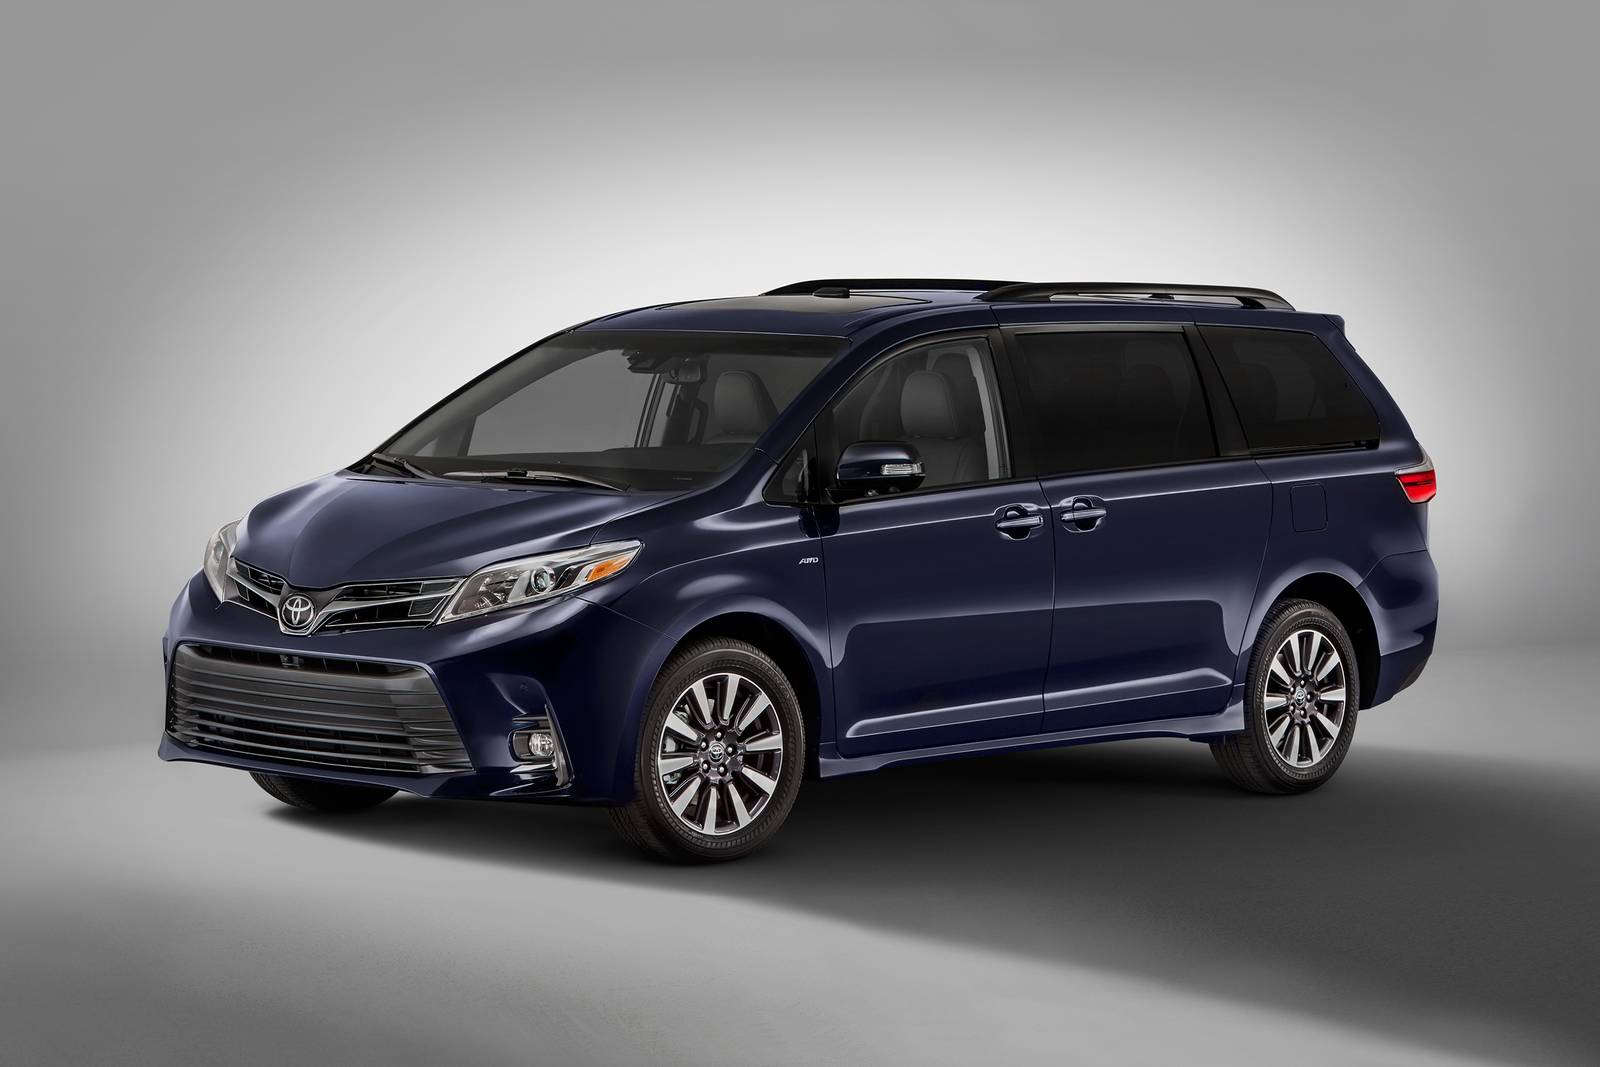 2019 Toyota Sienna Prices, Reviews, and 